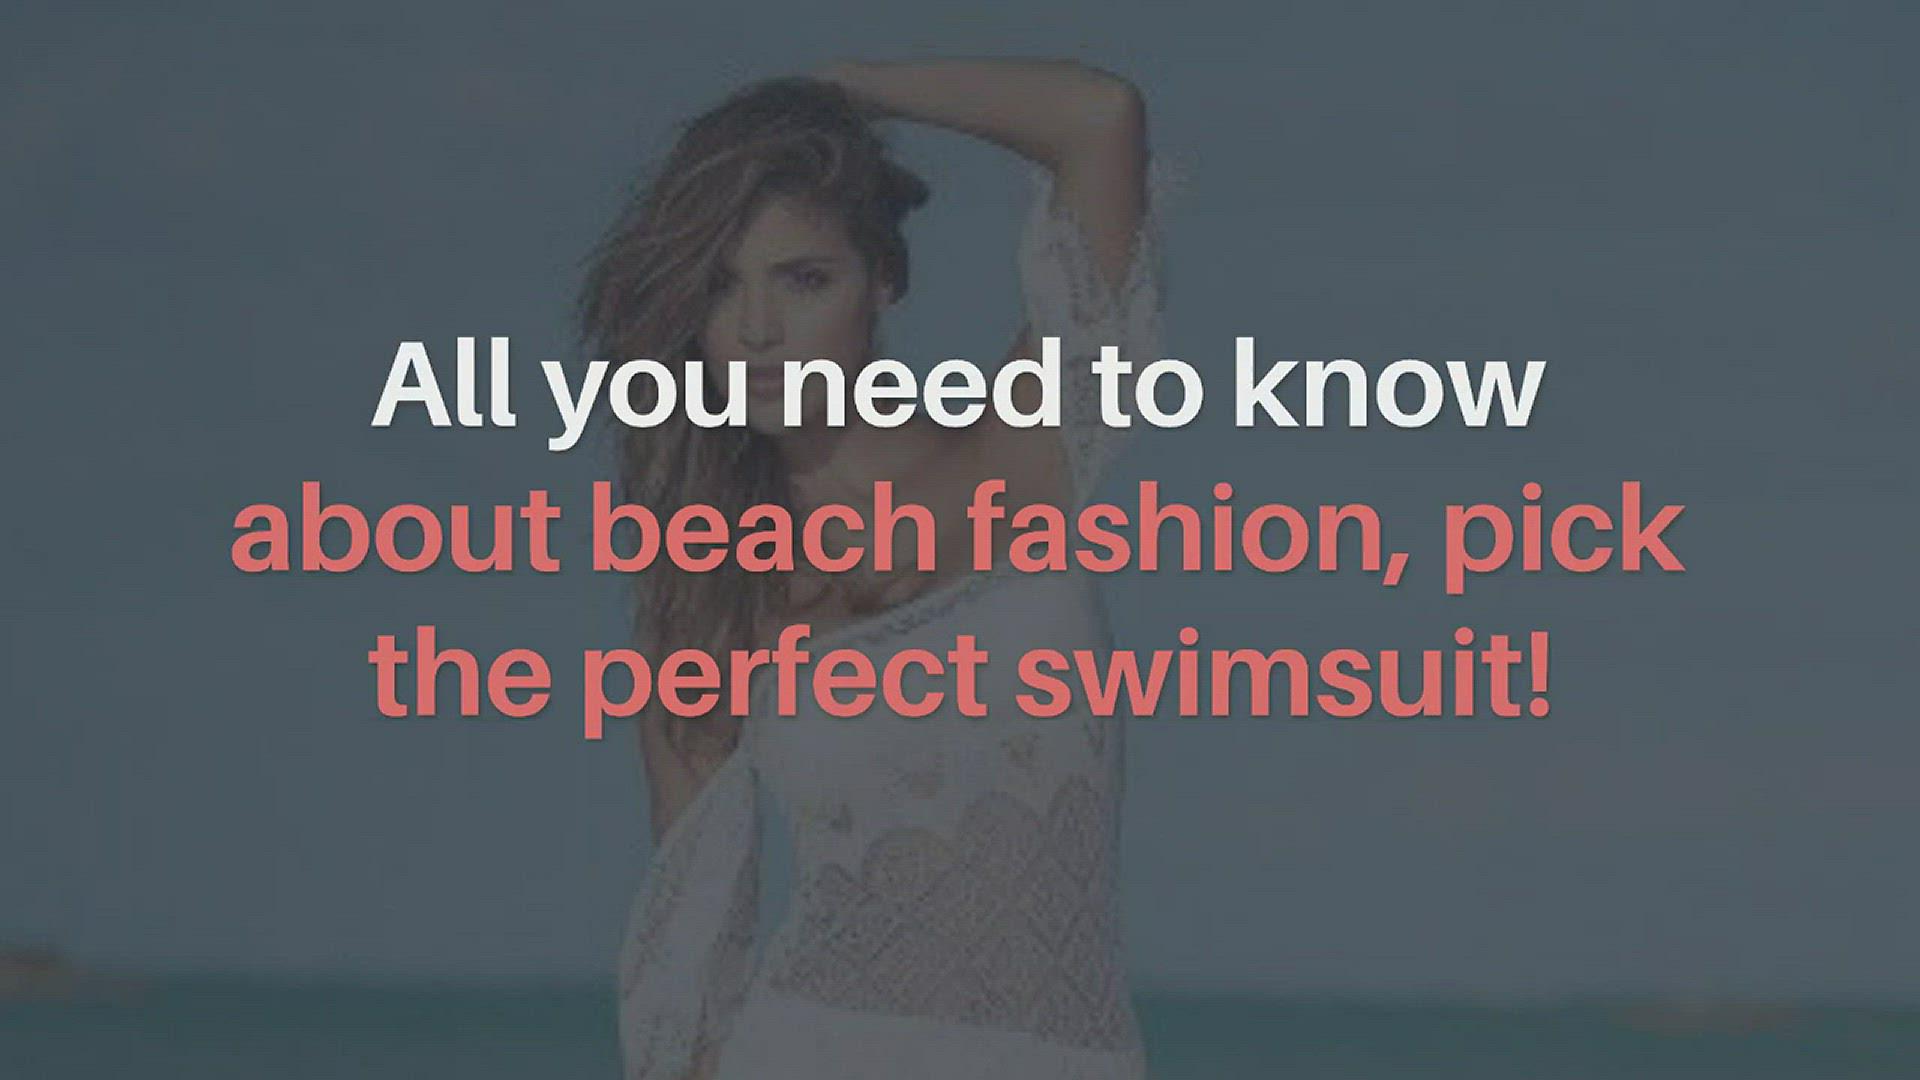 'Video thumbnail for All you need to know about beach fashion, pick the perfect swimsuit!'